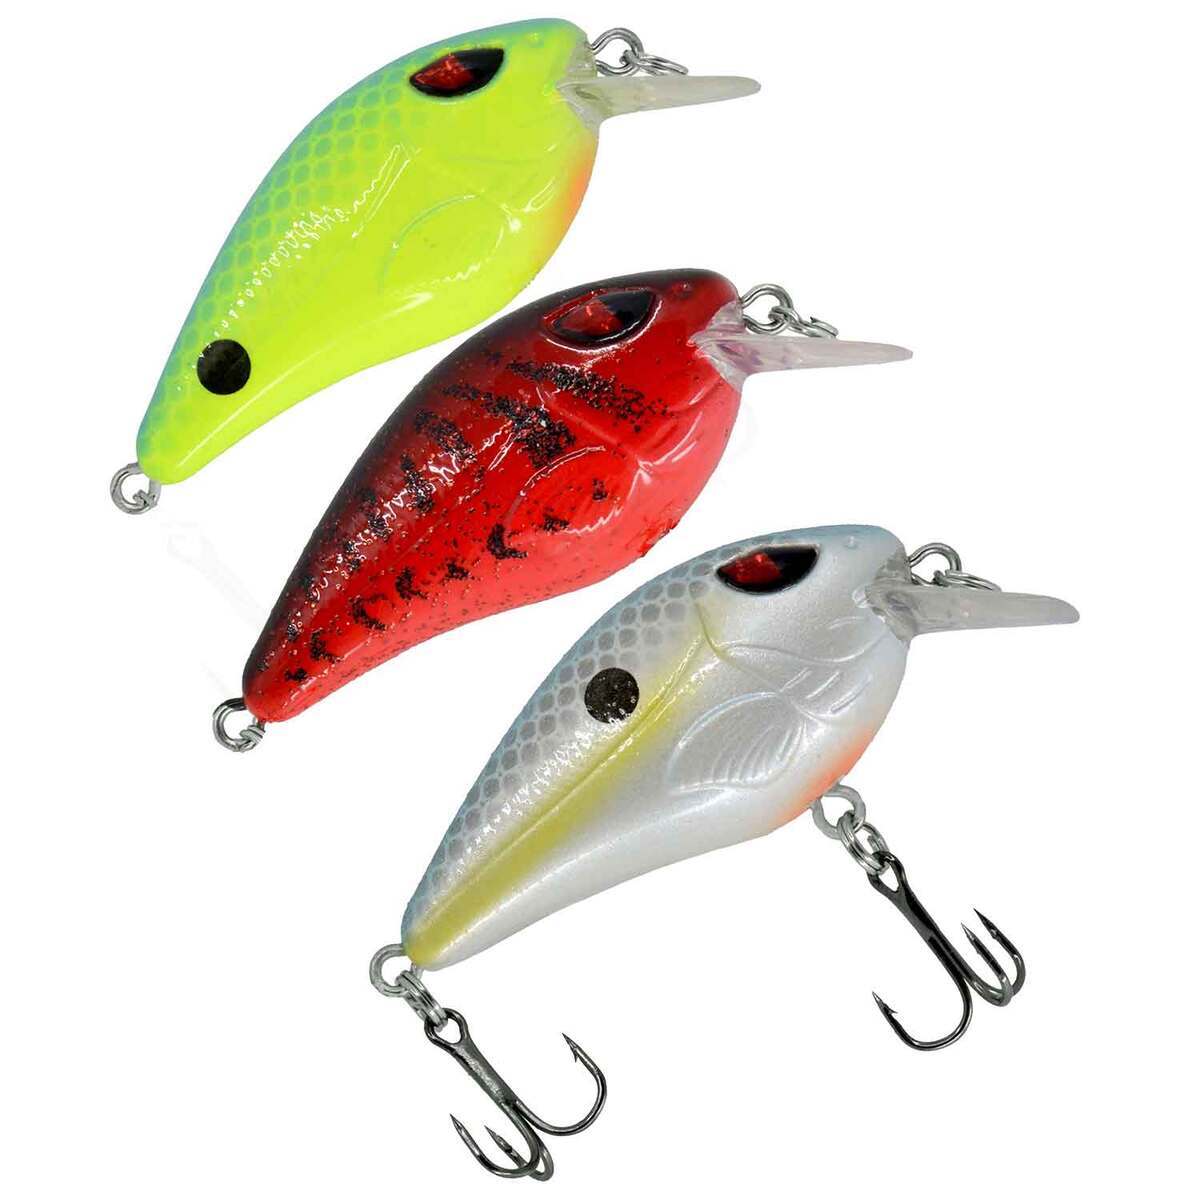 Chubbs Shallow Squarebill Pro Pack Crankbaits - 3 Pack - Assorted 6 by Sportsman's Warehouse